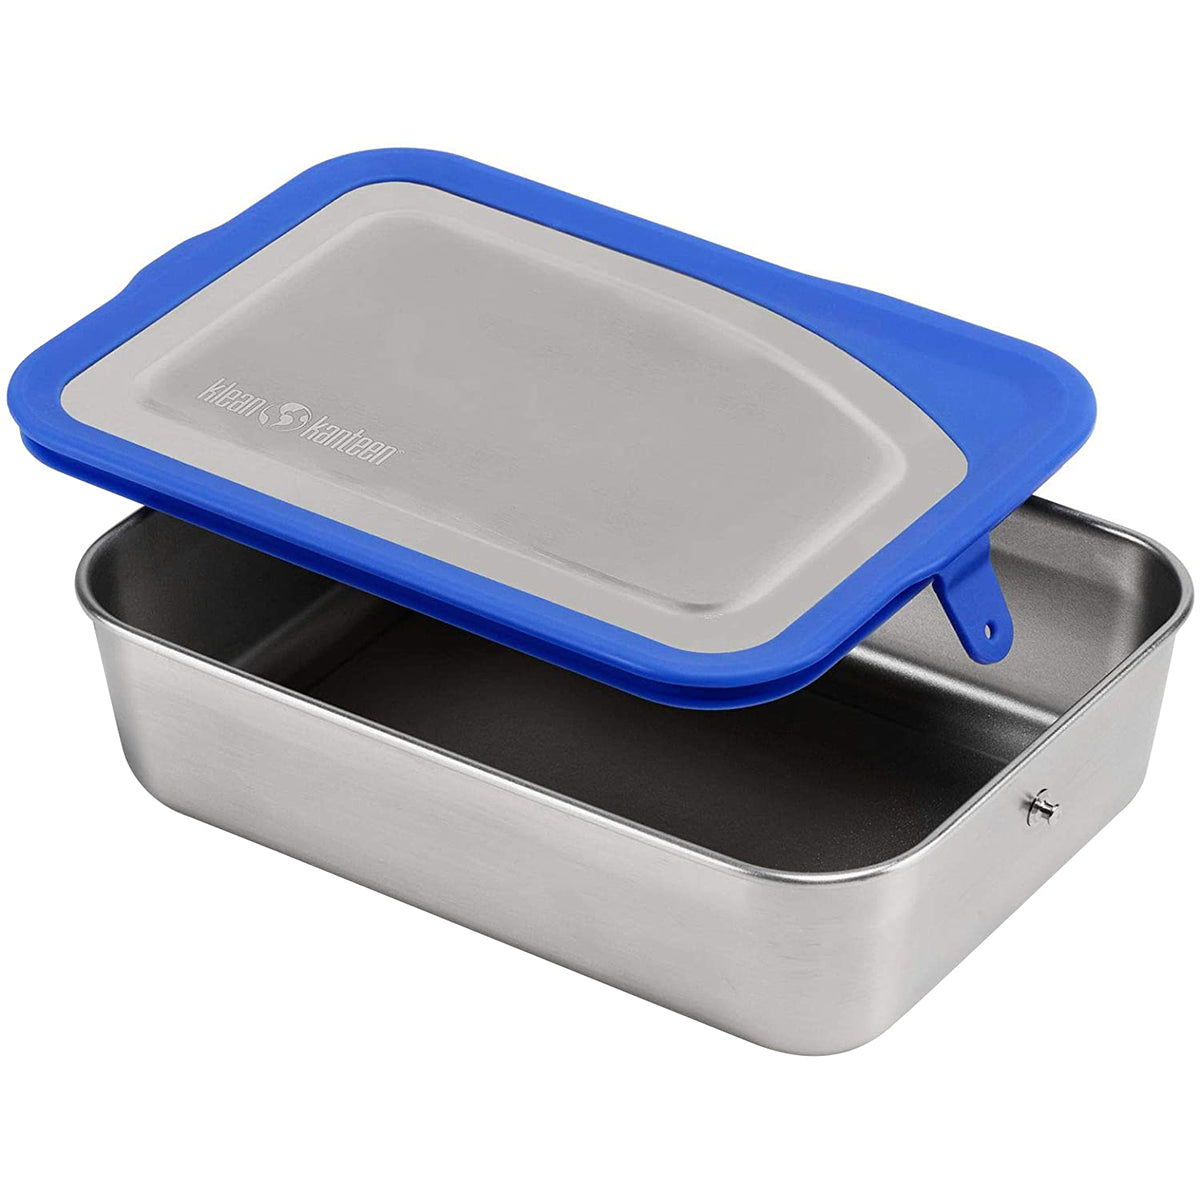 Klean Kanteen Stainless Steel Food Box with Silicone Lid -Meal Size Klean Kanteen